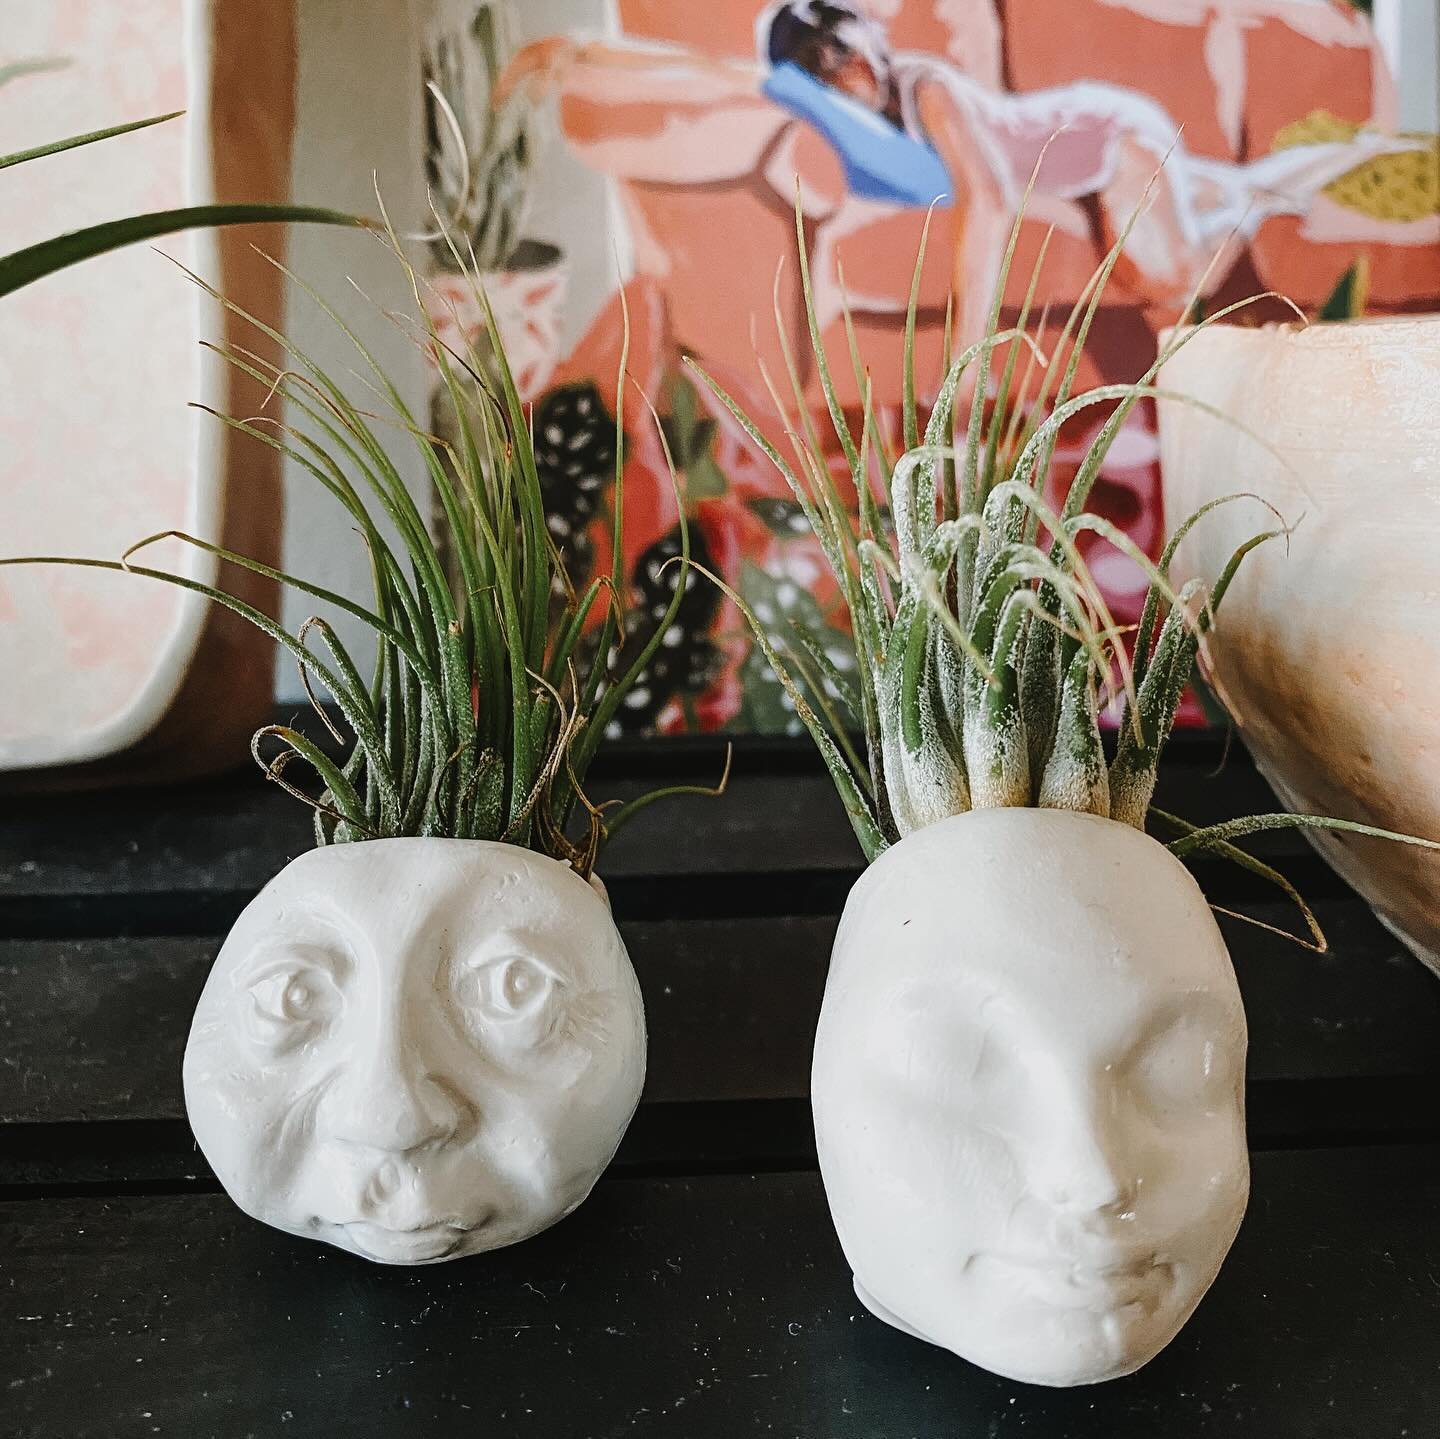 The pot heads are back! 🪴 Nicole of @pothead_pottery restocked the shop with her fun and funky air plant holders in all shapes and sizes. Each one has its own personality! Pop in today and bring home a new air plant friend.

.

.

.

.

.

.

#LiveL